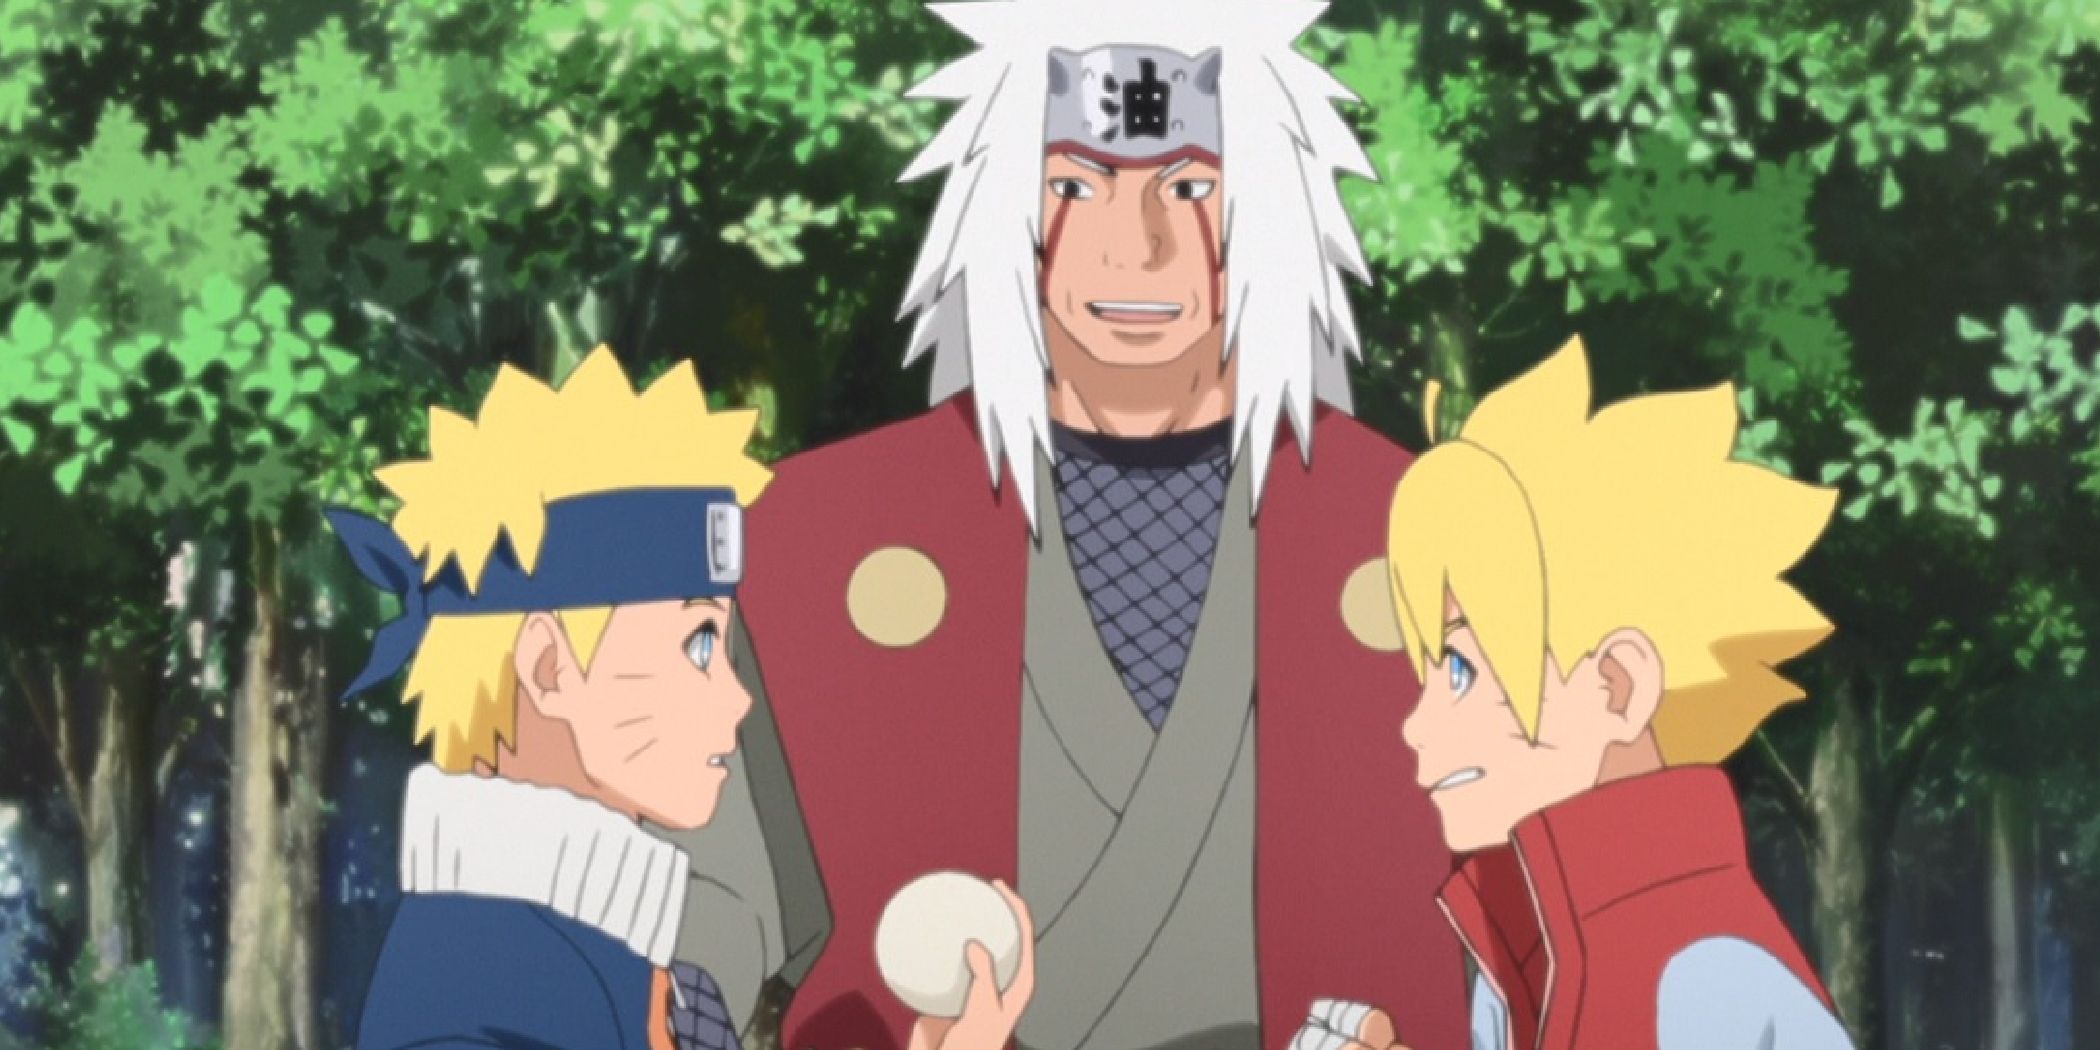 Screenshot from the Boruto anime shows a young Genin Naruto holding a rubber ball while a frustrated Boruto stands in front of him. Jiraiya stands behind them.